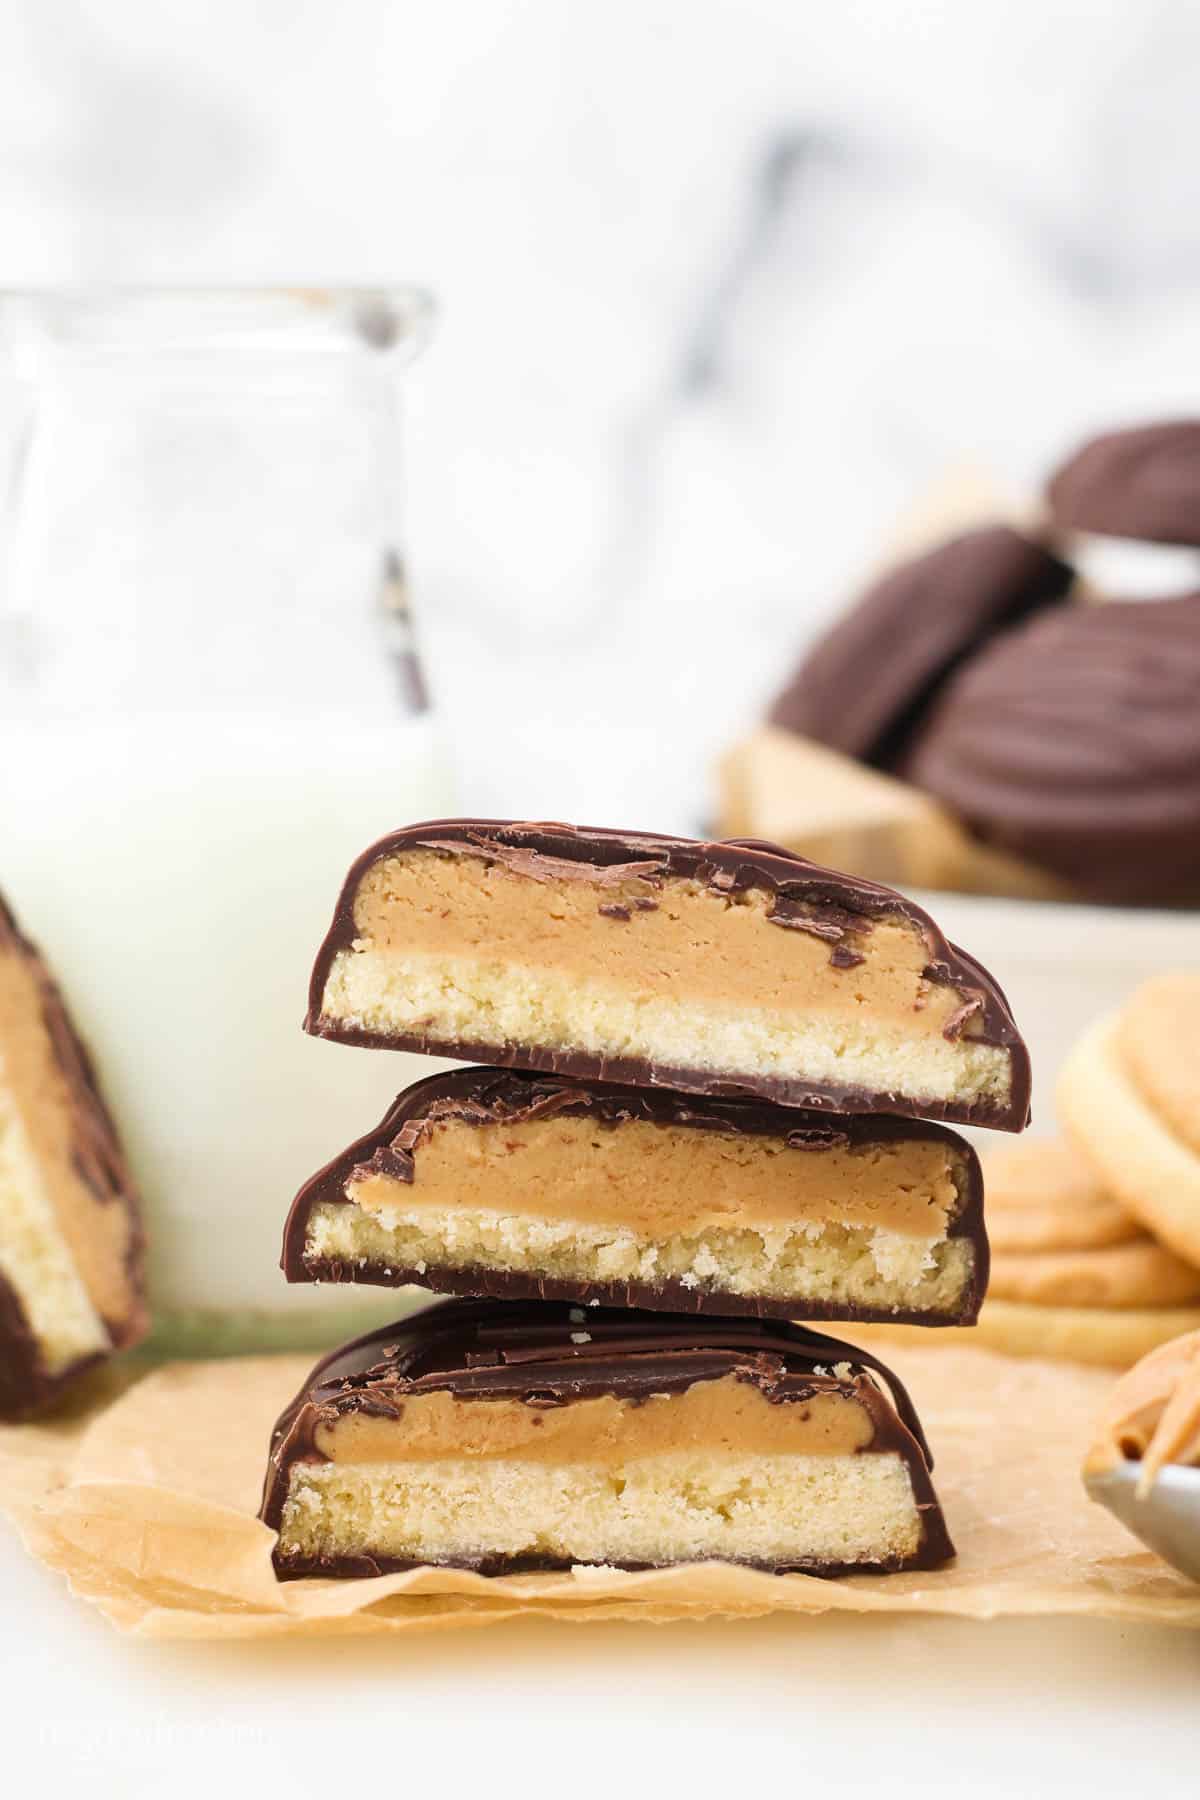 3 stacked Tagalong cookies cut in half to show the inside layers